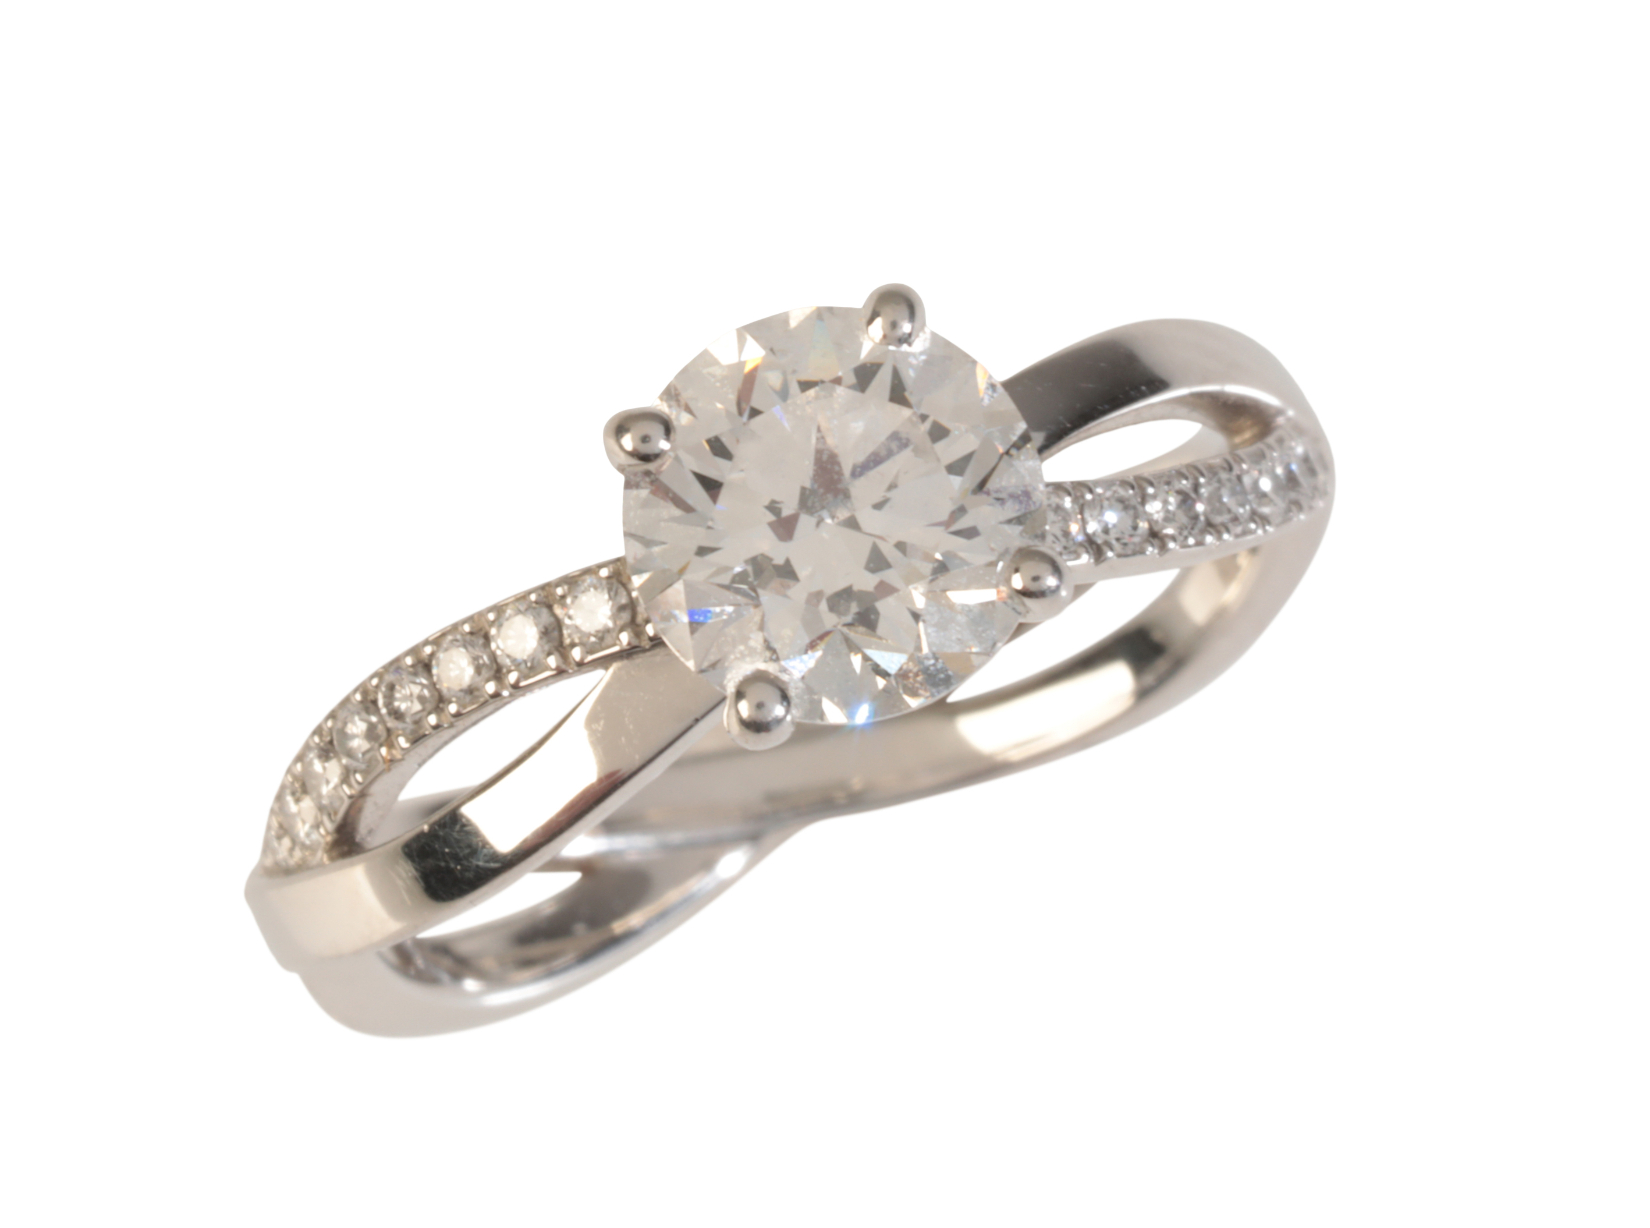 DE BEERS: A DIAMOND SOLITAIRE ENGAGEMENT RING